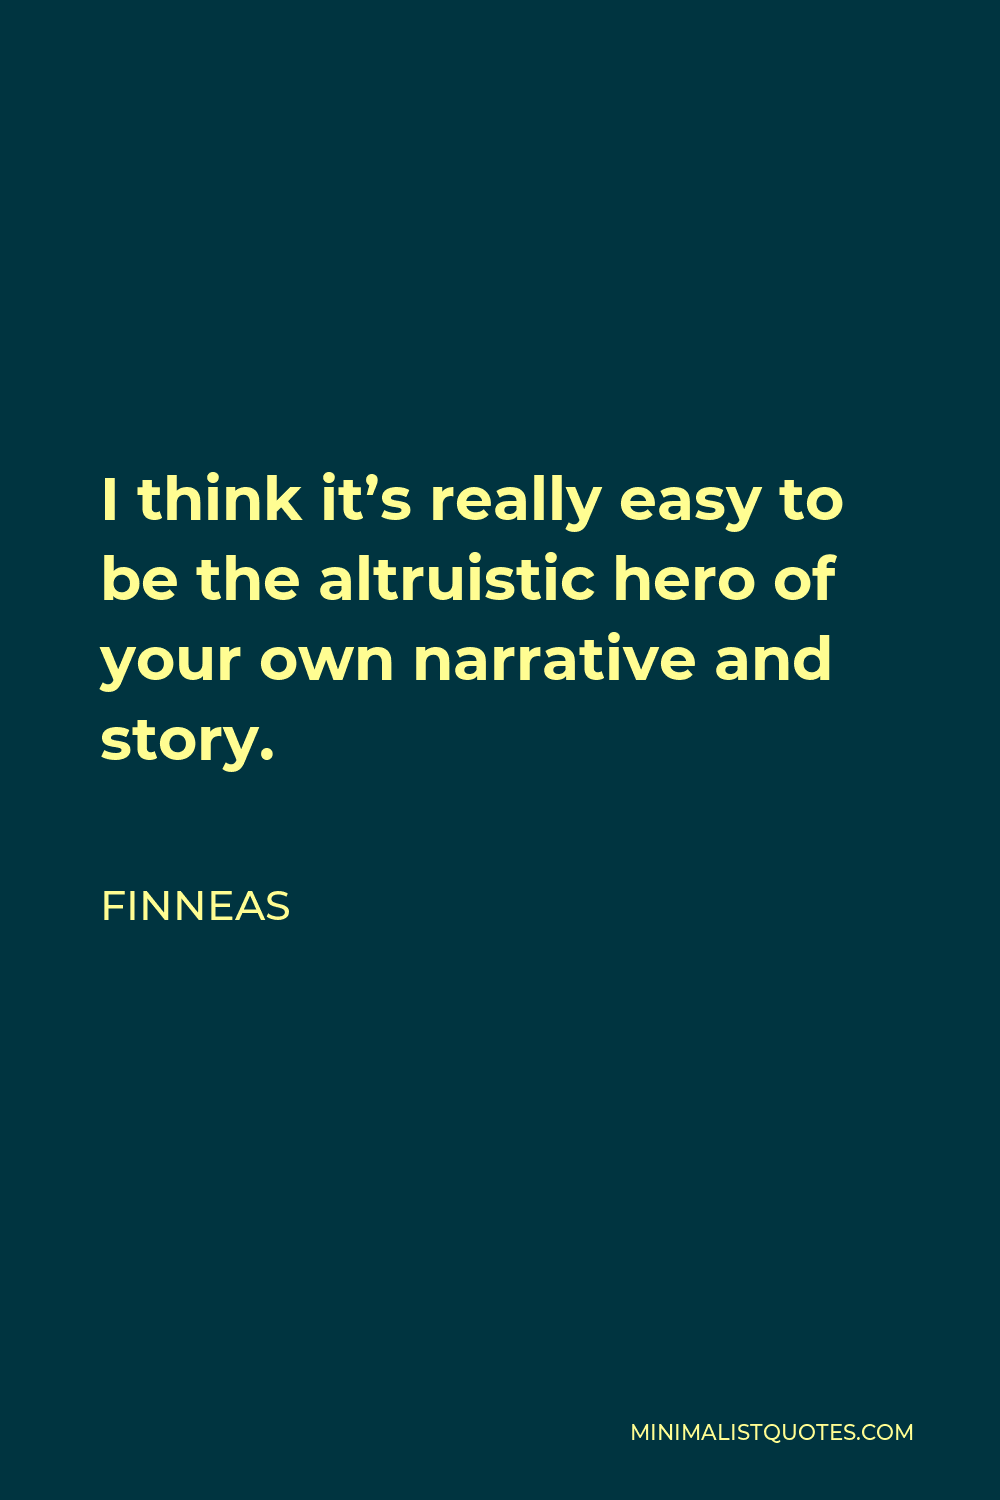 Finneas Quote - I think it’s really easy to be the altruistic hero of your own narrative and story.